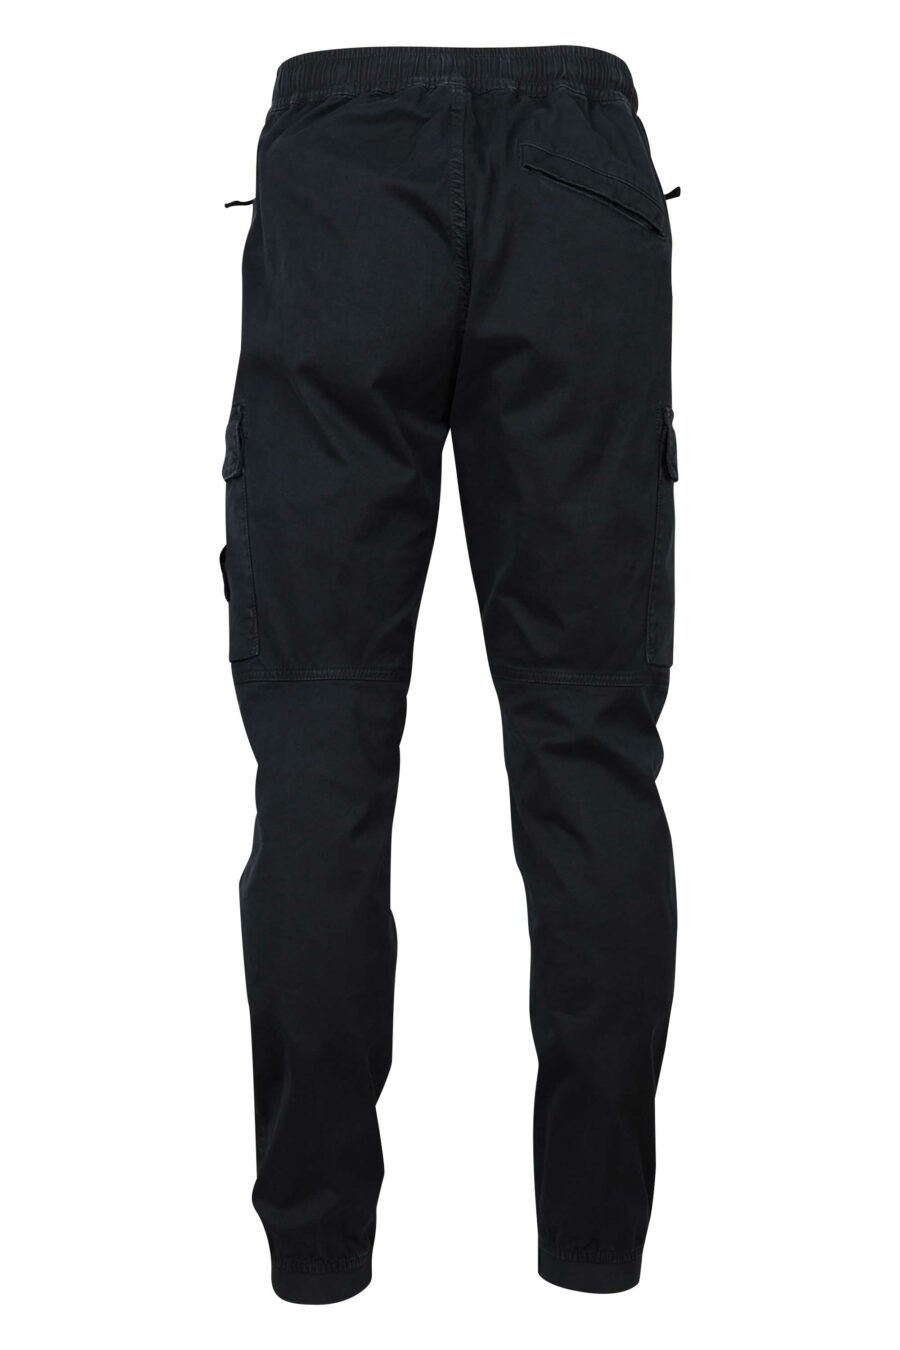 Black trousers with side logo patch - 8052572723292 2